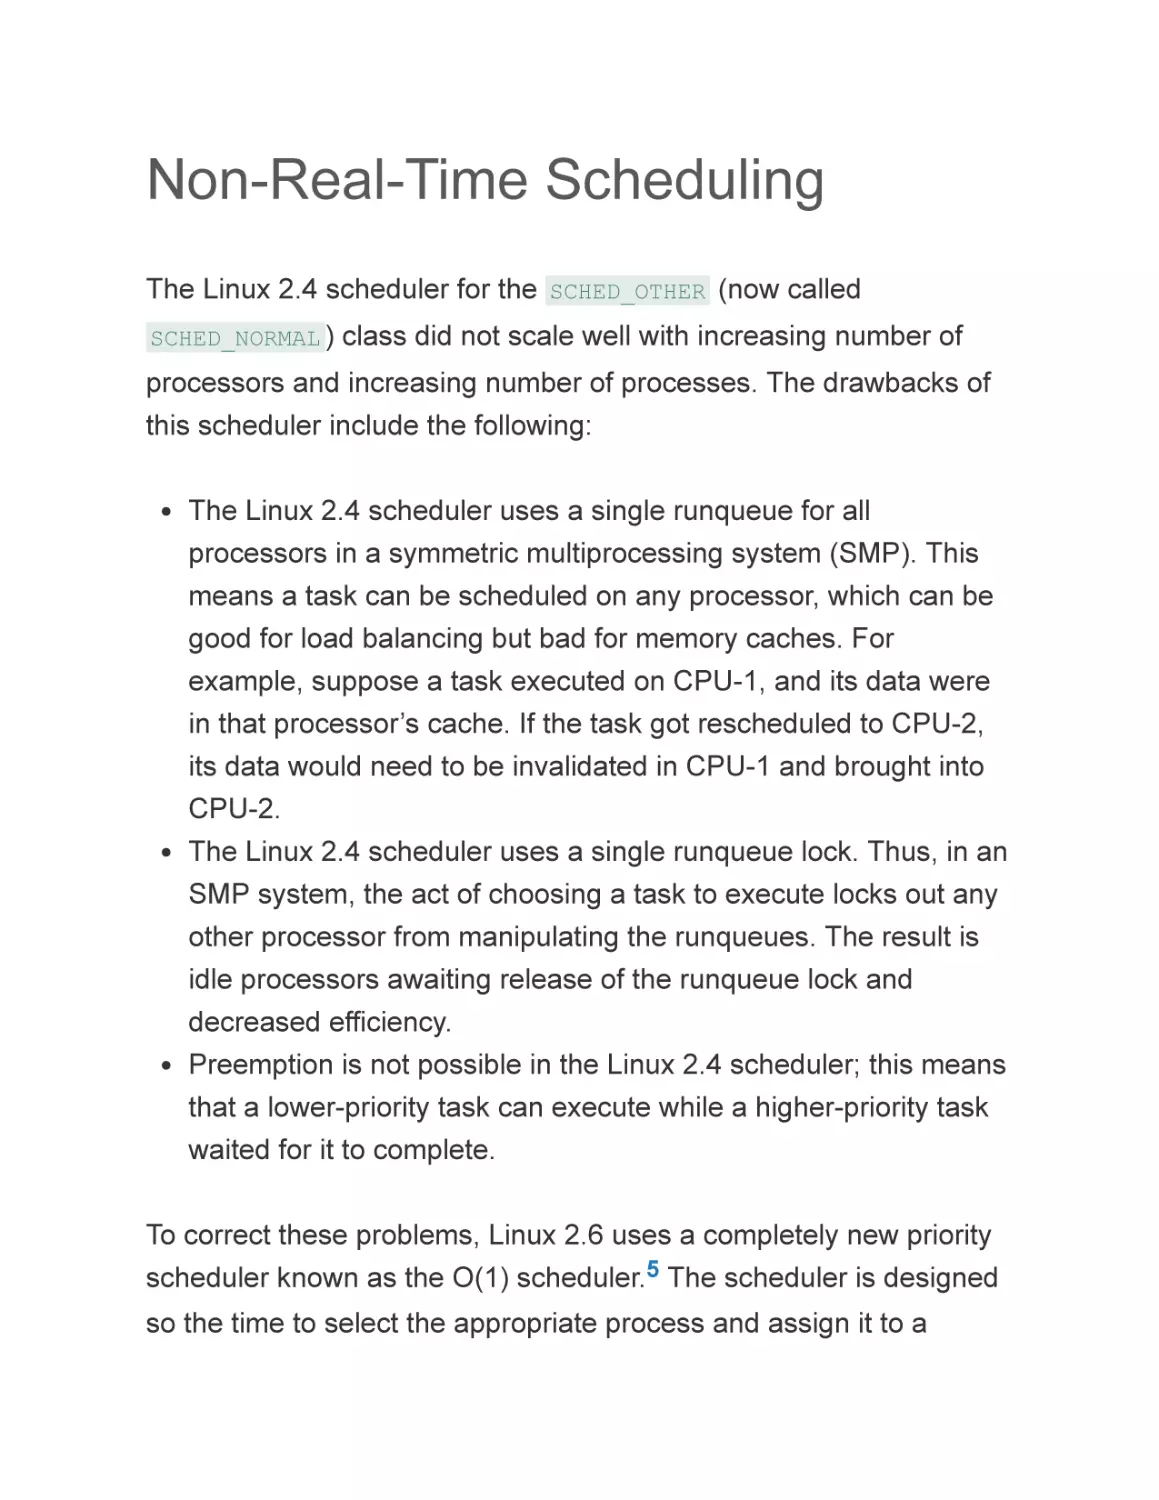 Non-Real-Time Scheduling